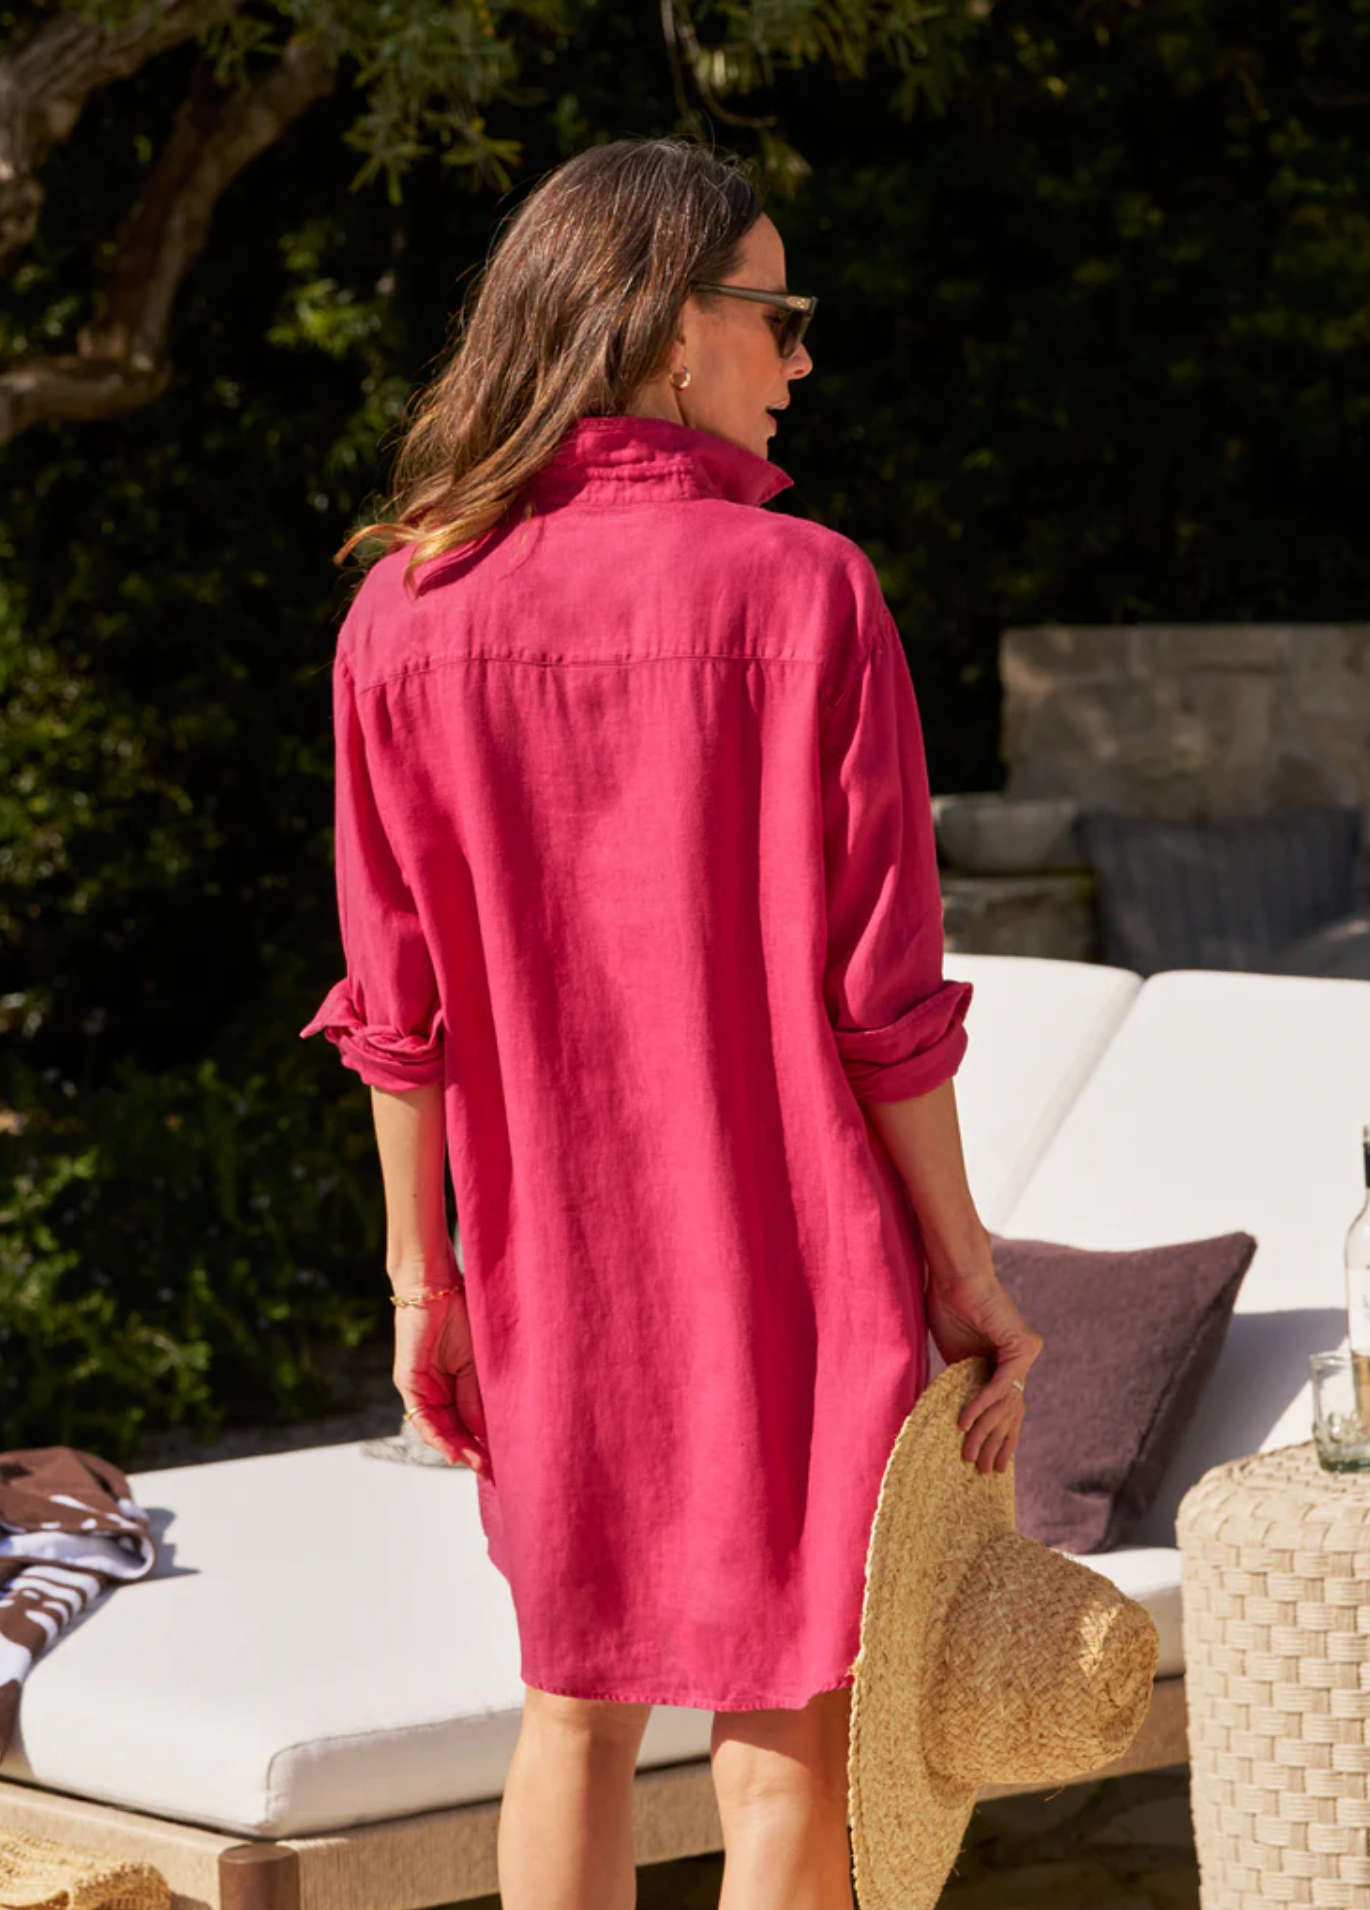 Mary shirtdress hot pink back view